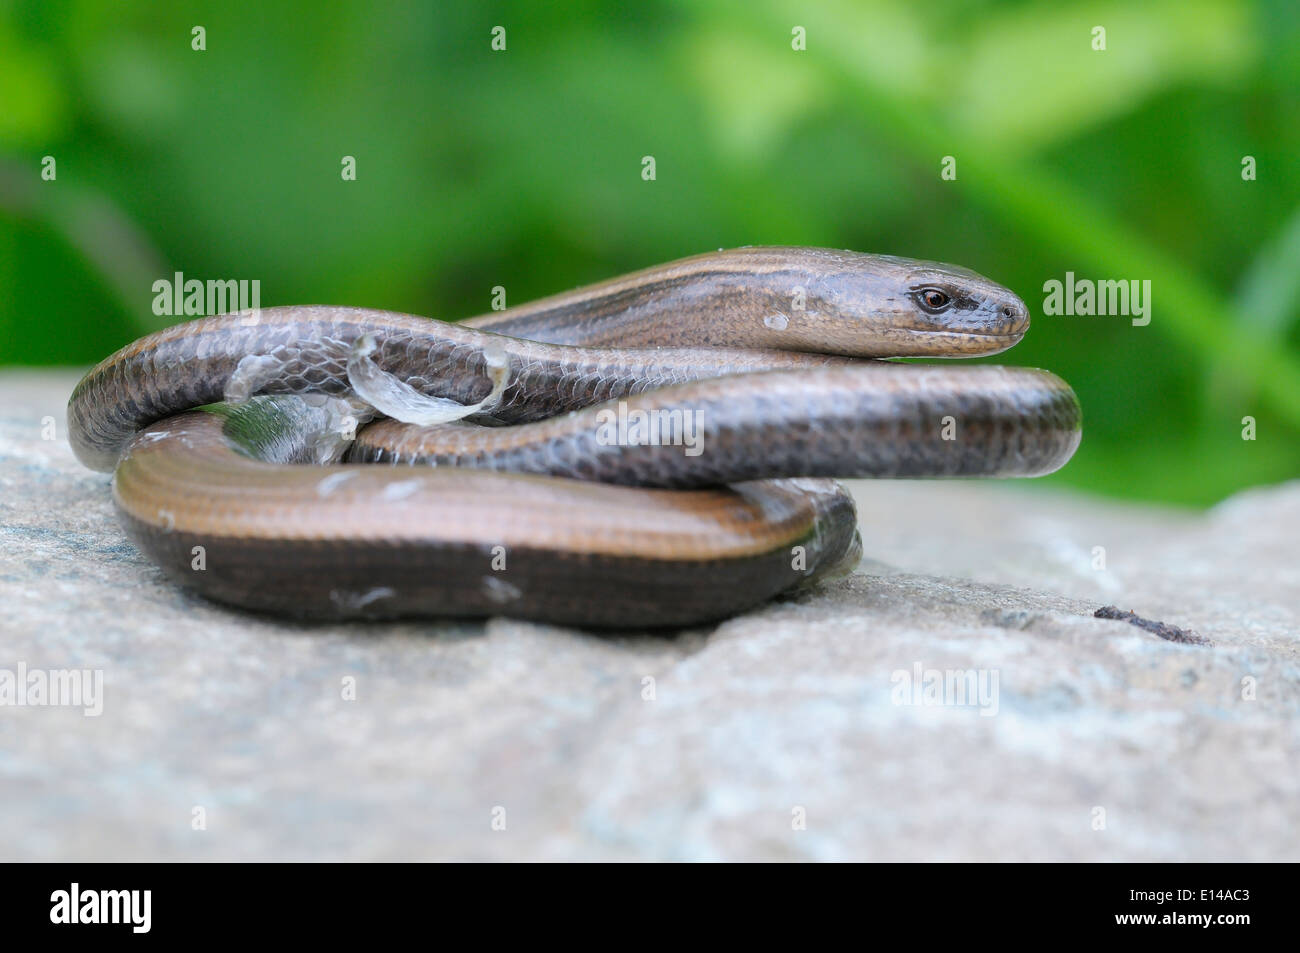 Coiled slow worm Stock Photo